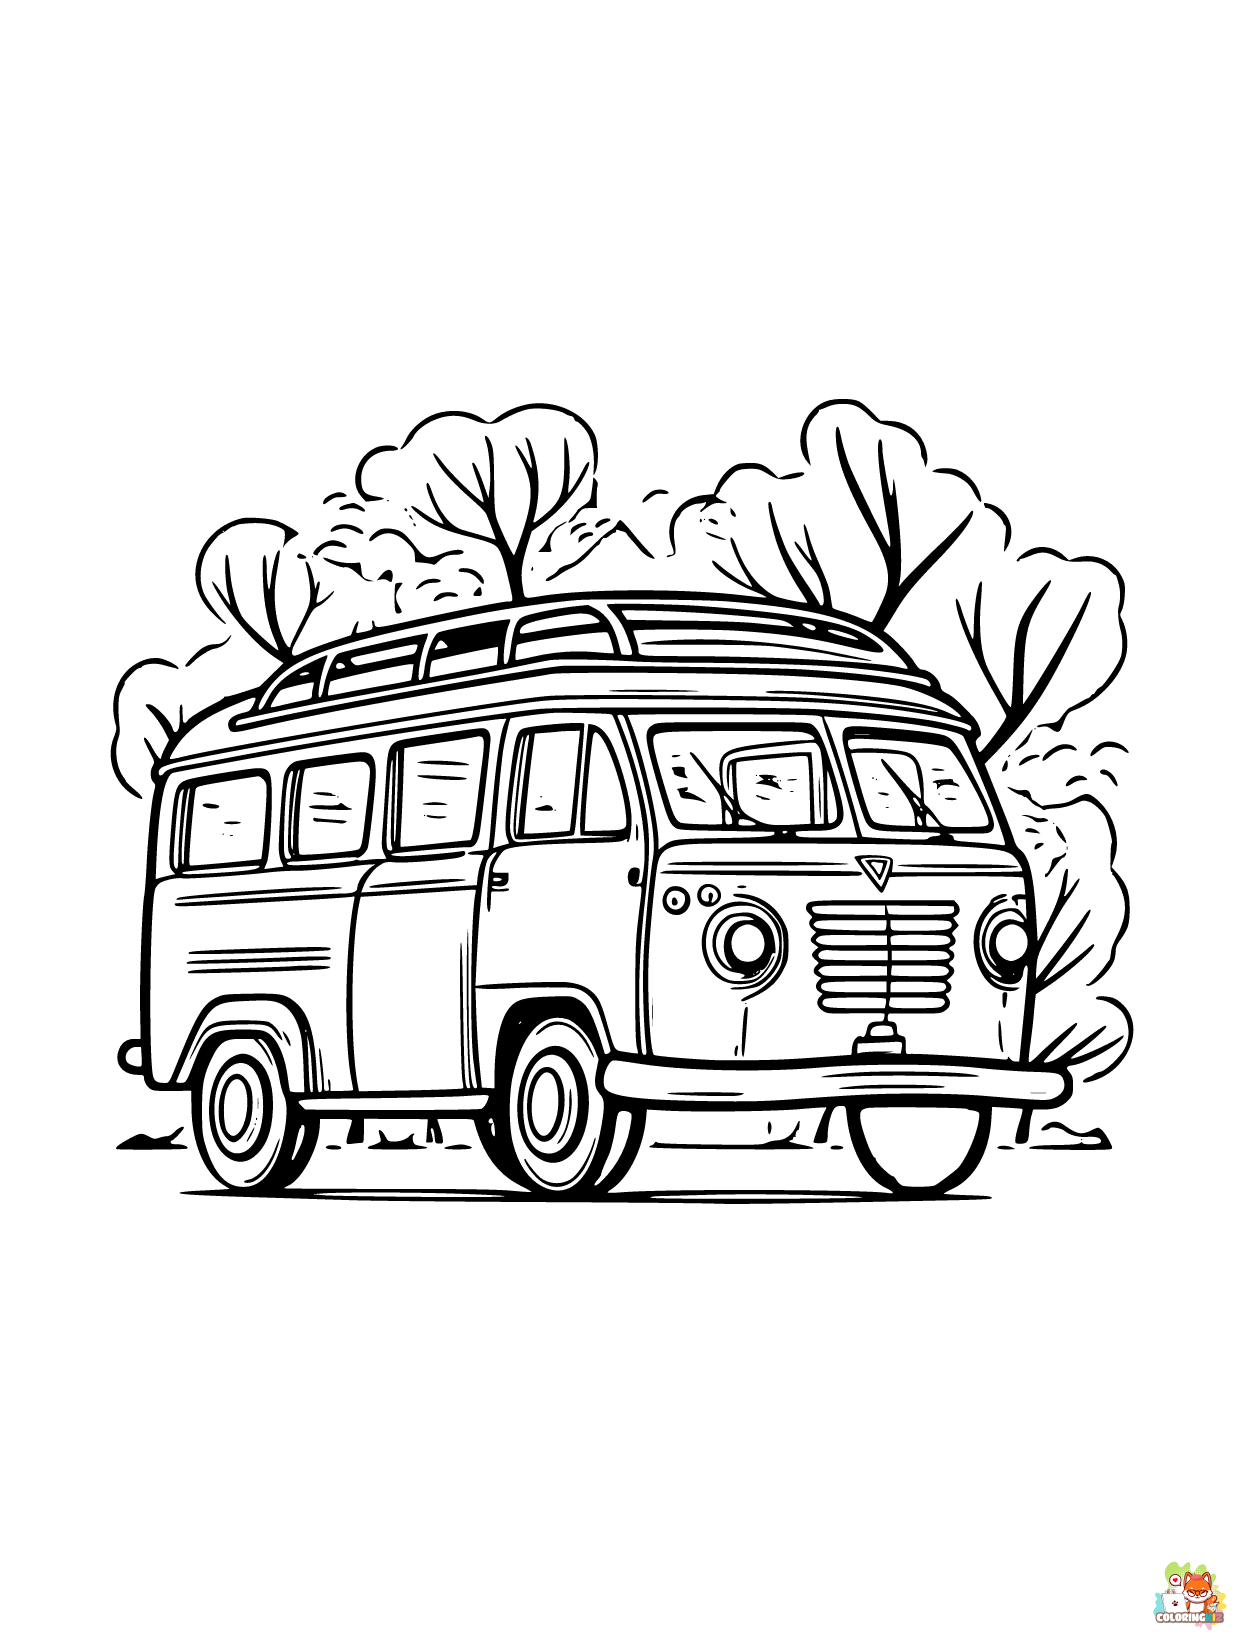 N1 Midjourney Car Coloring pages for adult A school bus with ch 0ad9fdbb 5a48 4687 aca3 bff6ab7972ac edge